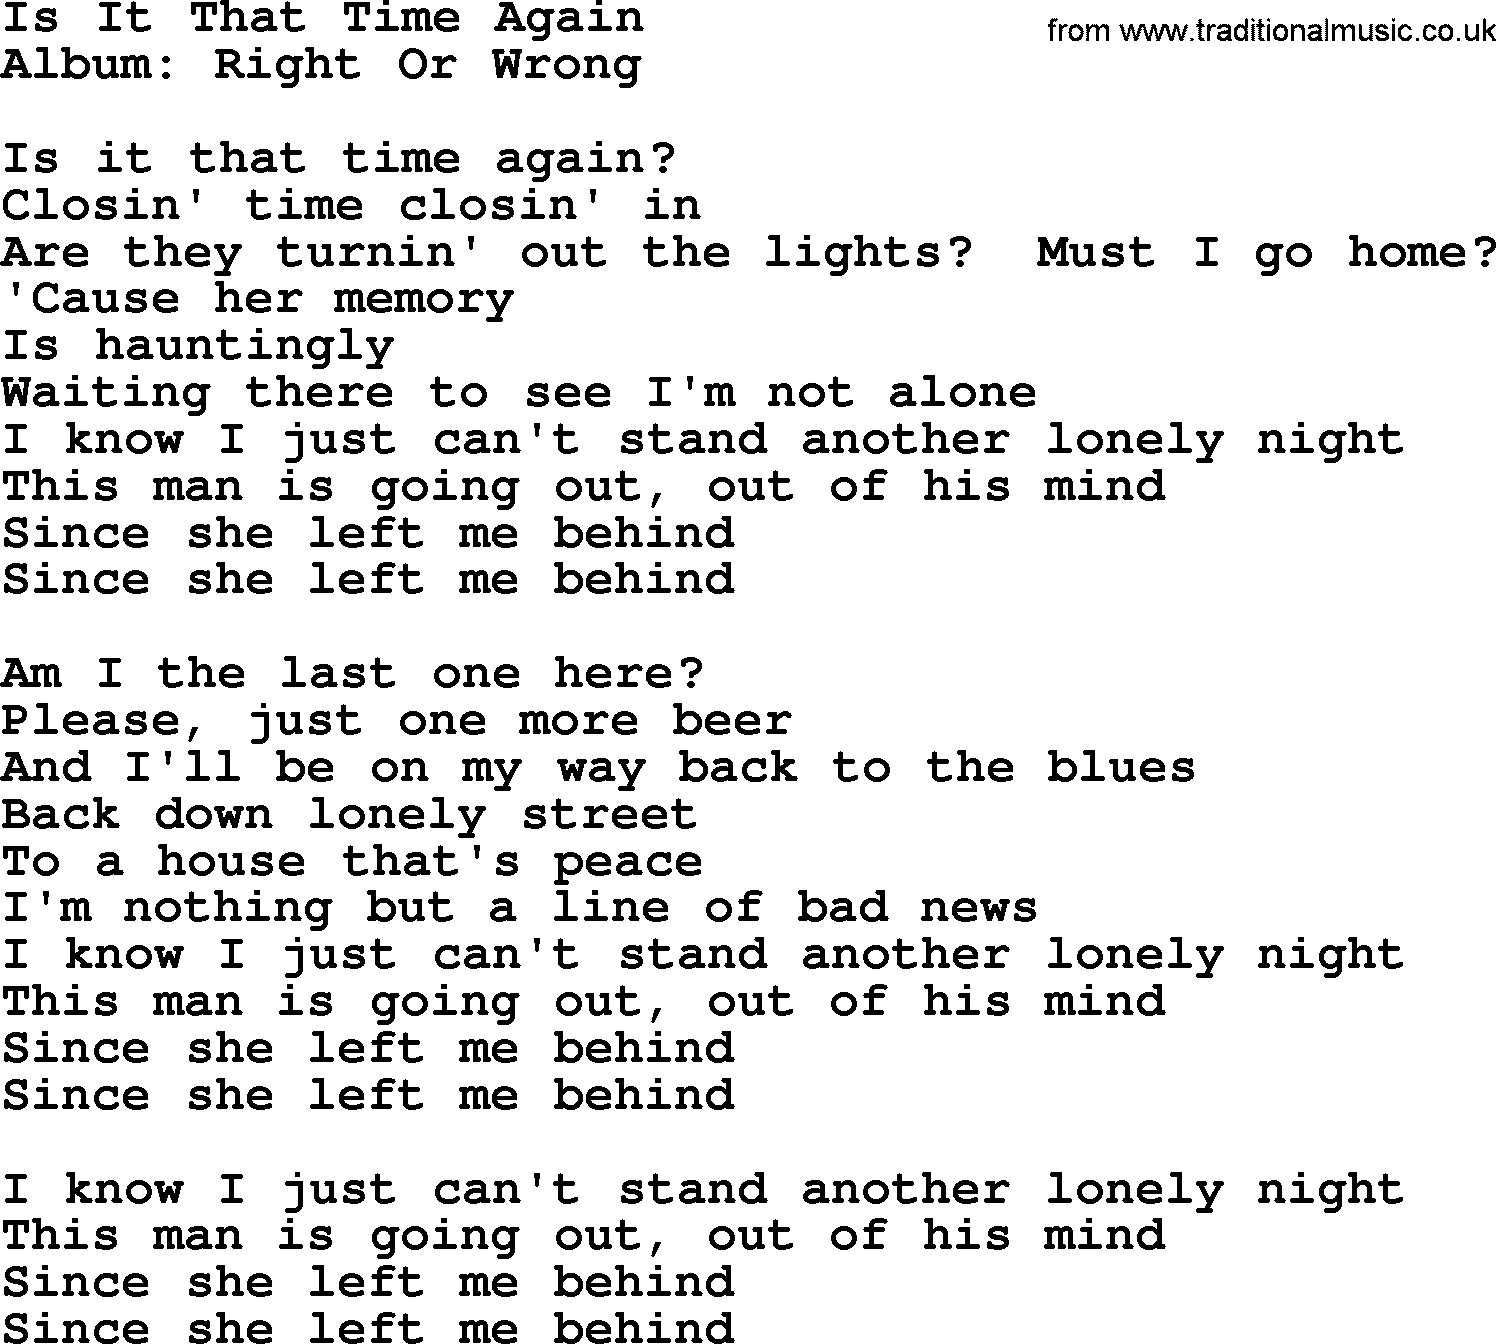 George Strait song: Is It That Time Again, lyrics